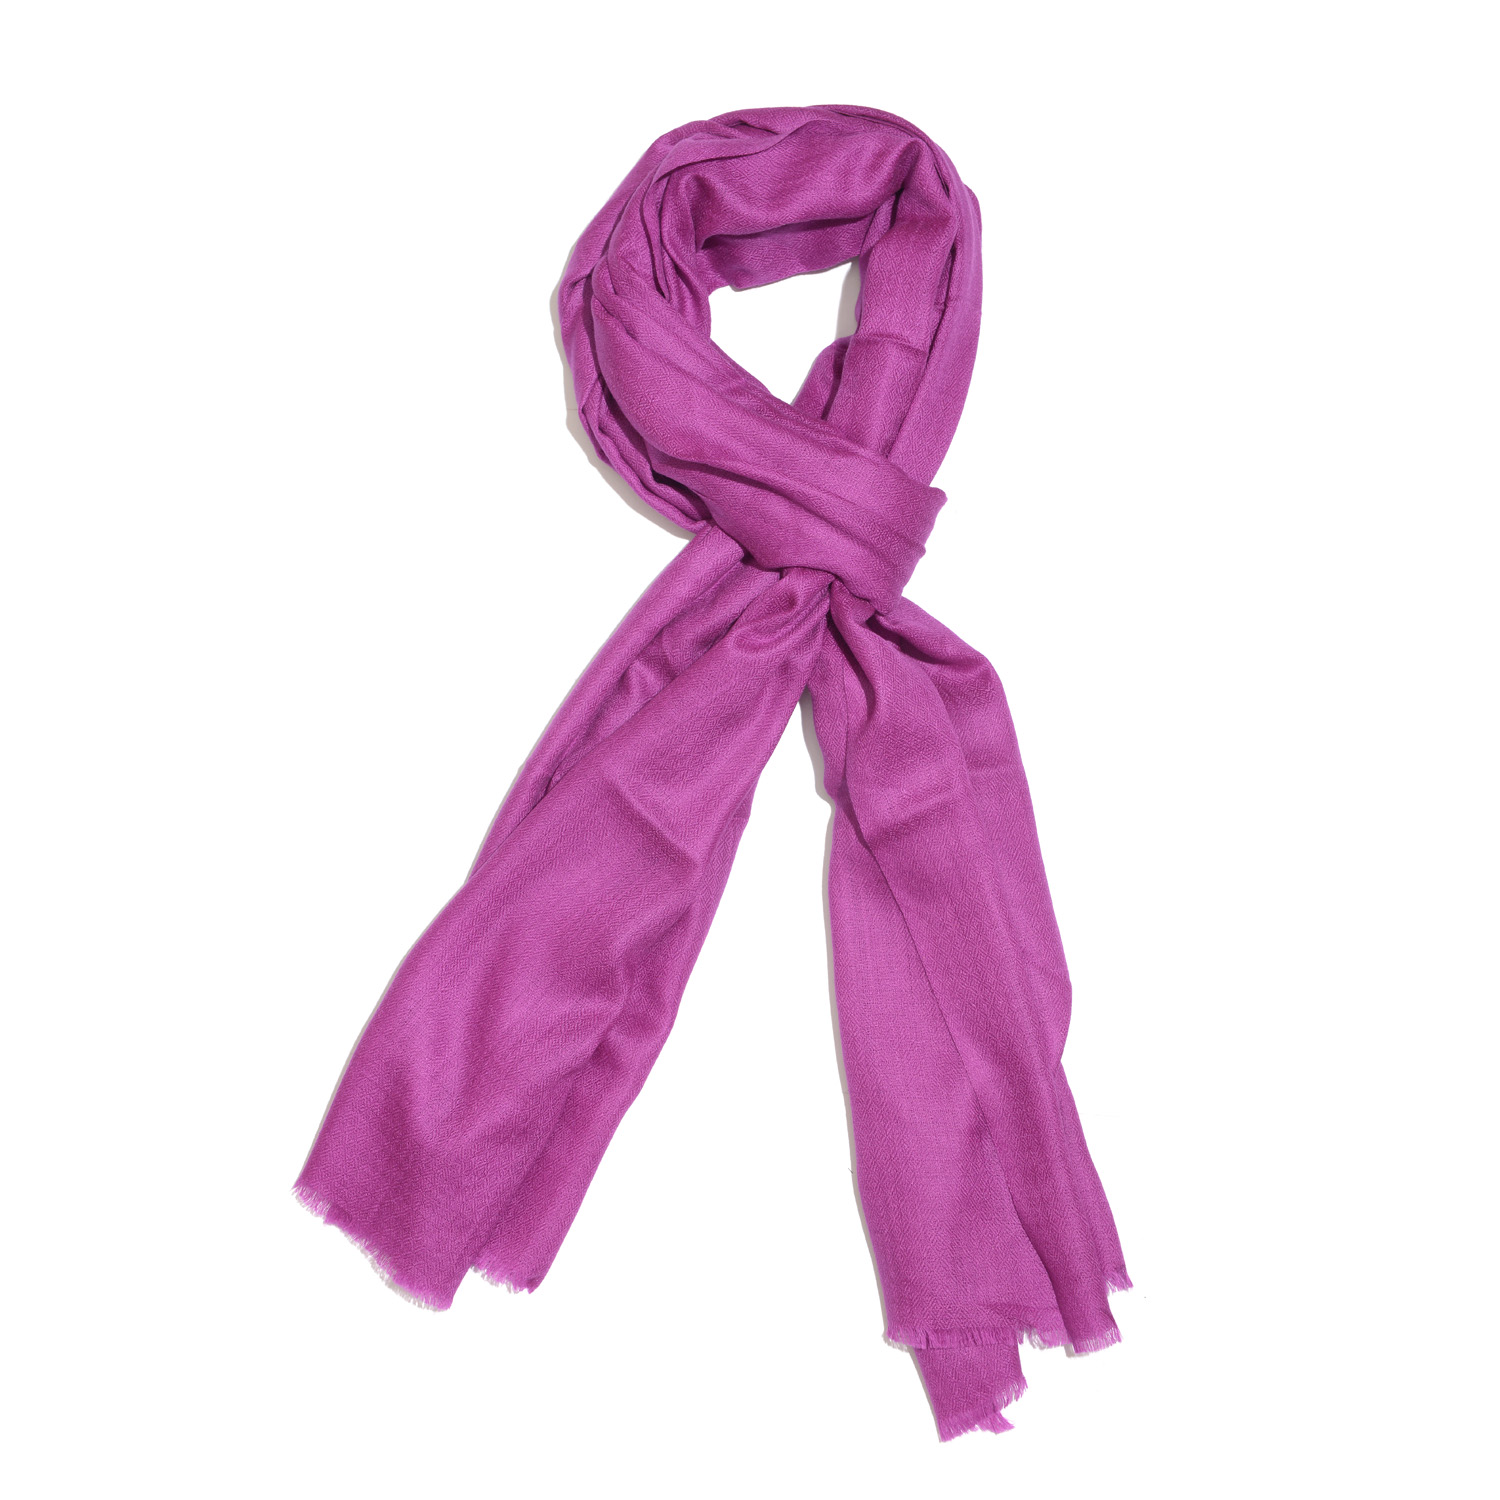 Super Soft - Cashmere Wool Fuchsia Color Shawl with Fringes